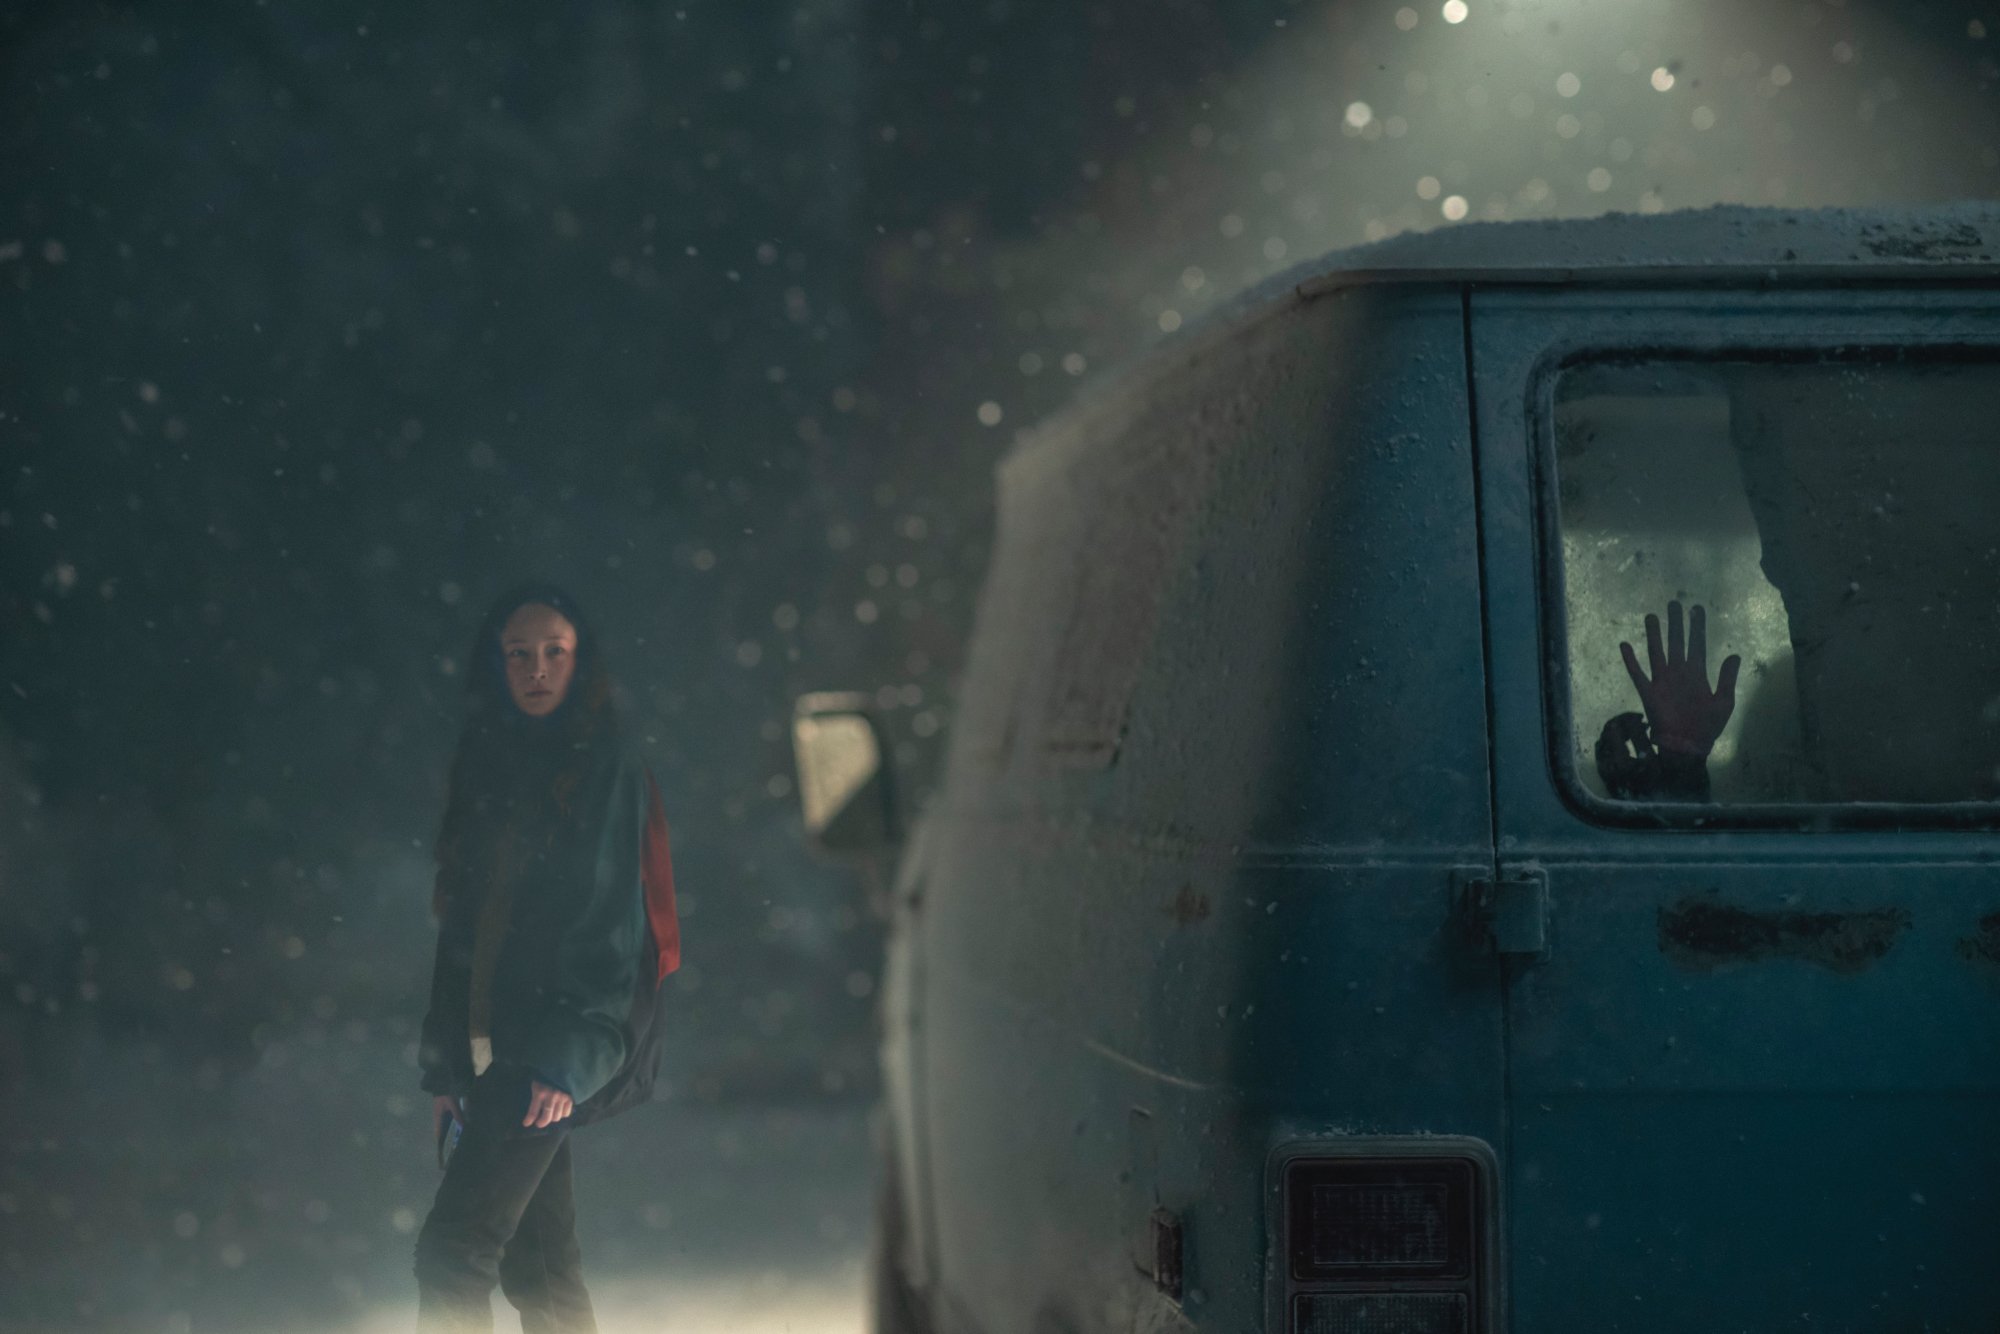 ‘No Exit’ Movie Review: The Predictable Hulu Thriller Entertains Amidst a Snowstorm